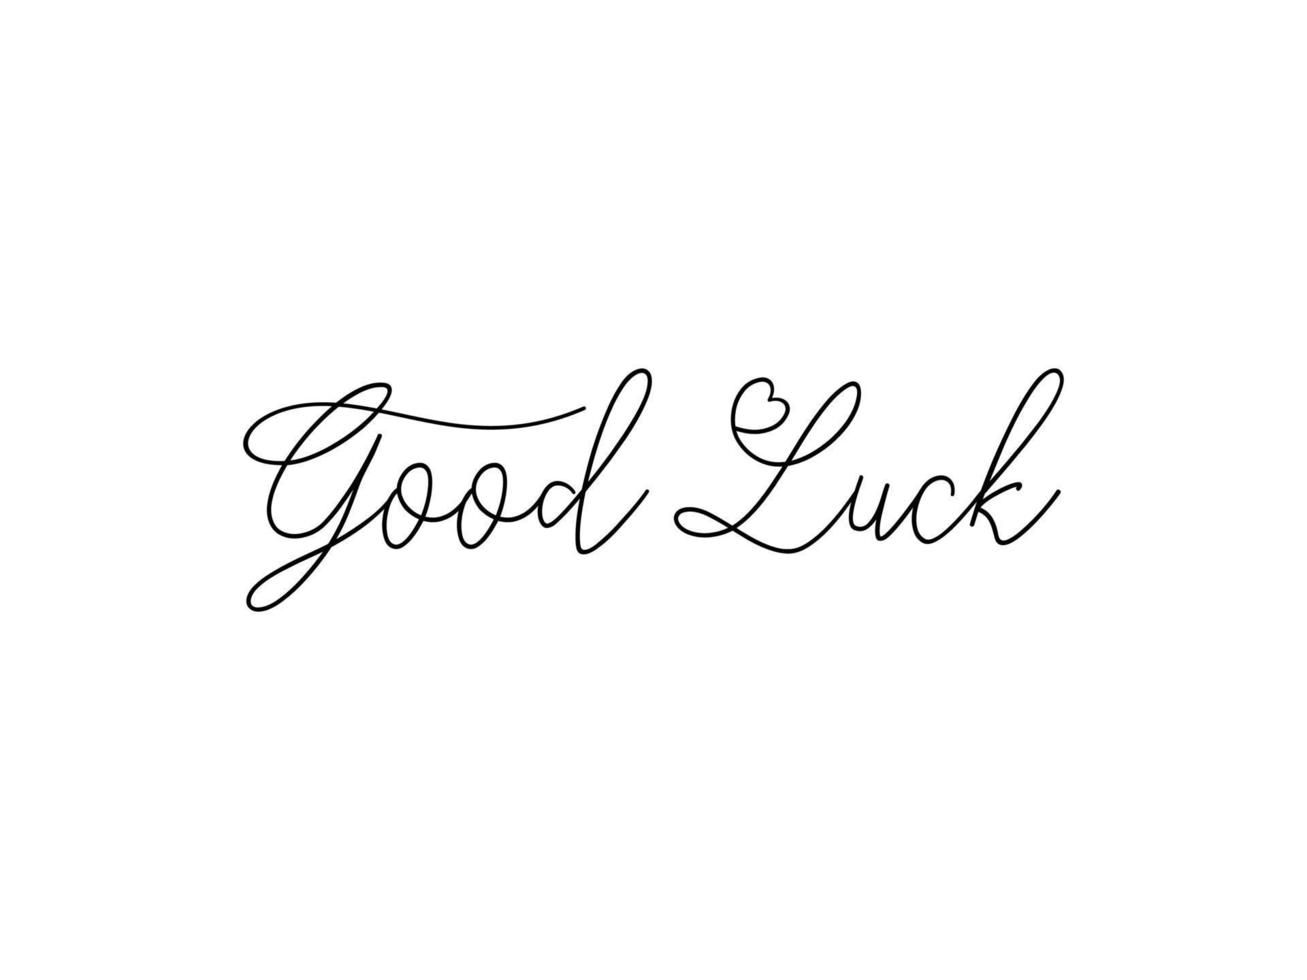 Good Luck Text Handwritten Lettering Calligraphy with Black Script isolated on White Background. Greeting Card Vector Illustration.